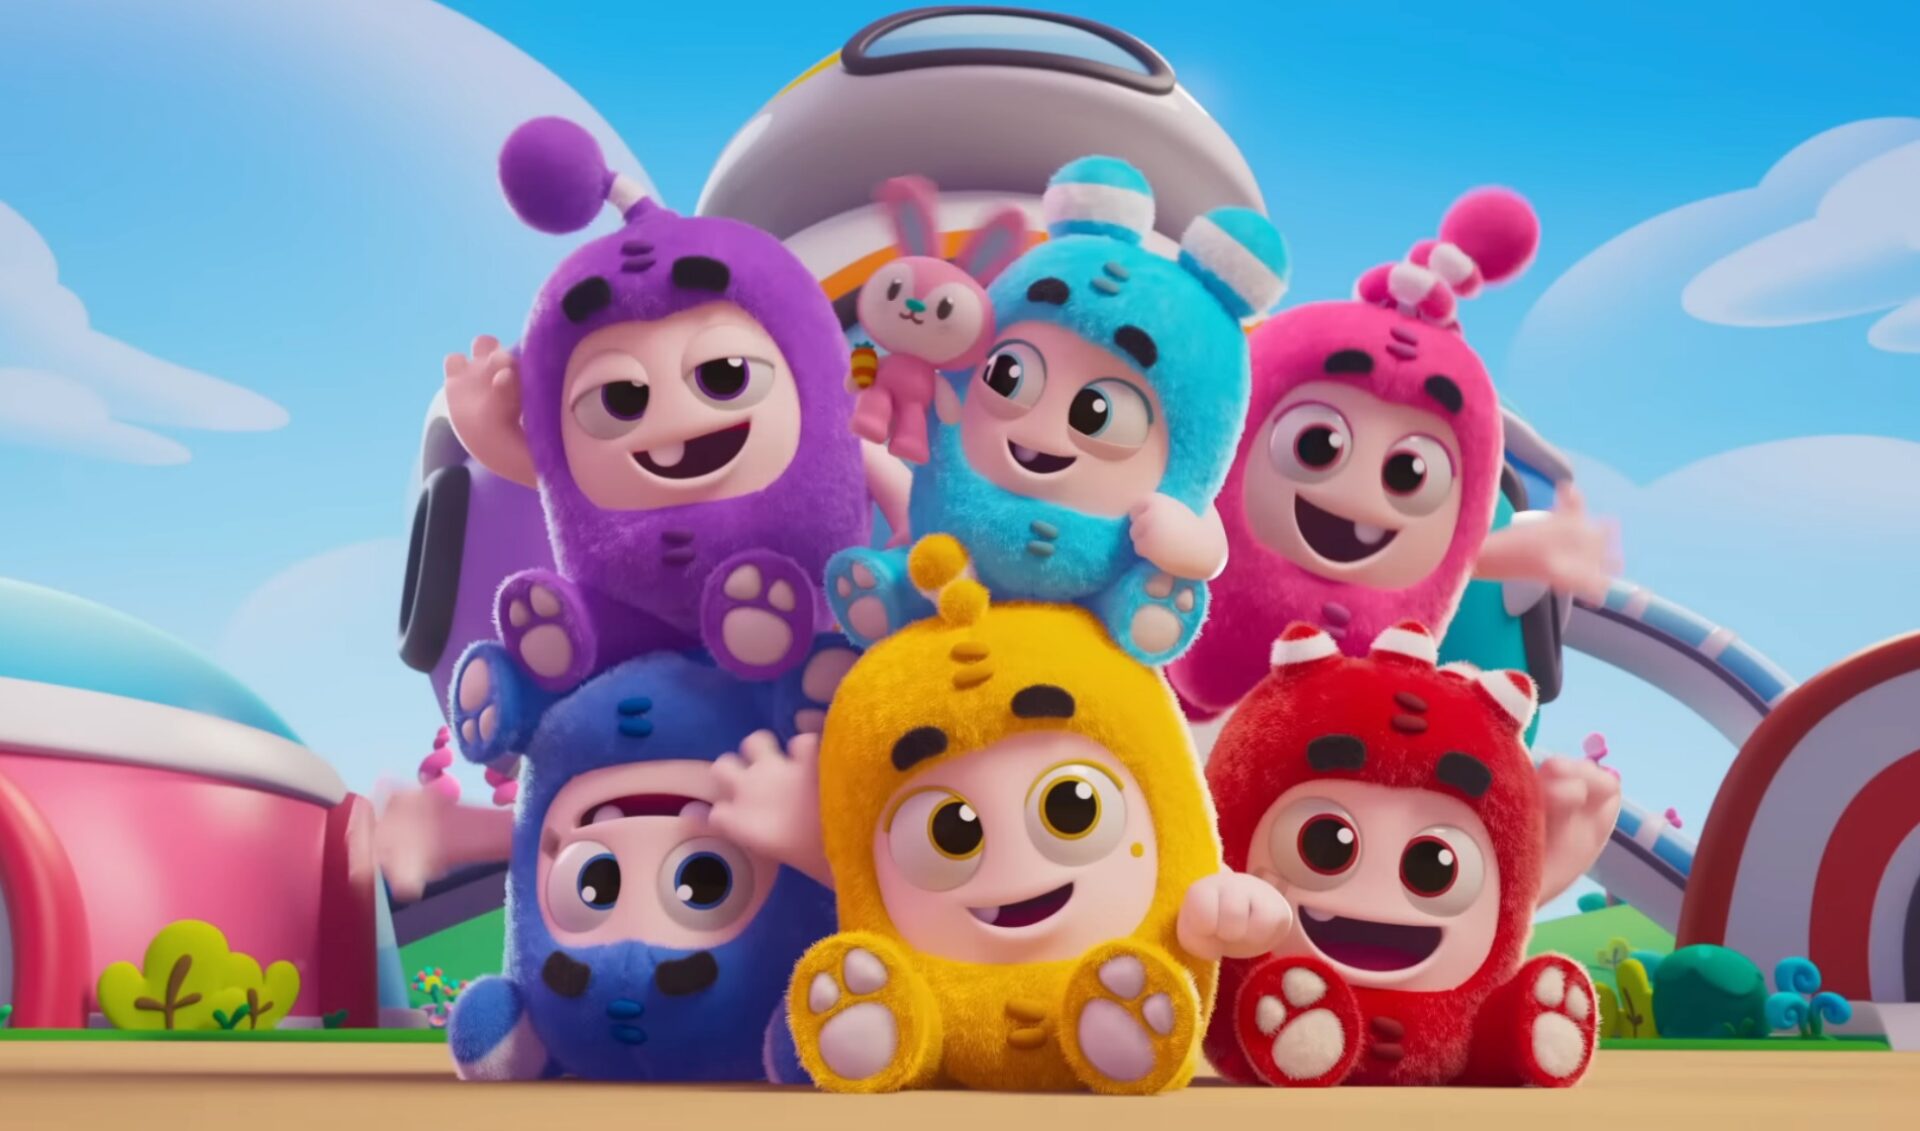 Moonbug makes ‘Minibods’ to spin off some of its cutest characters